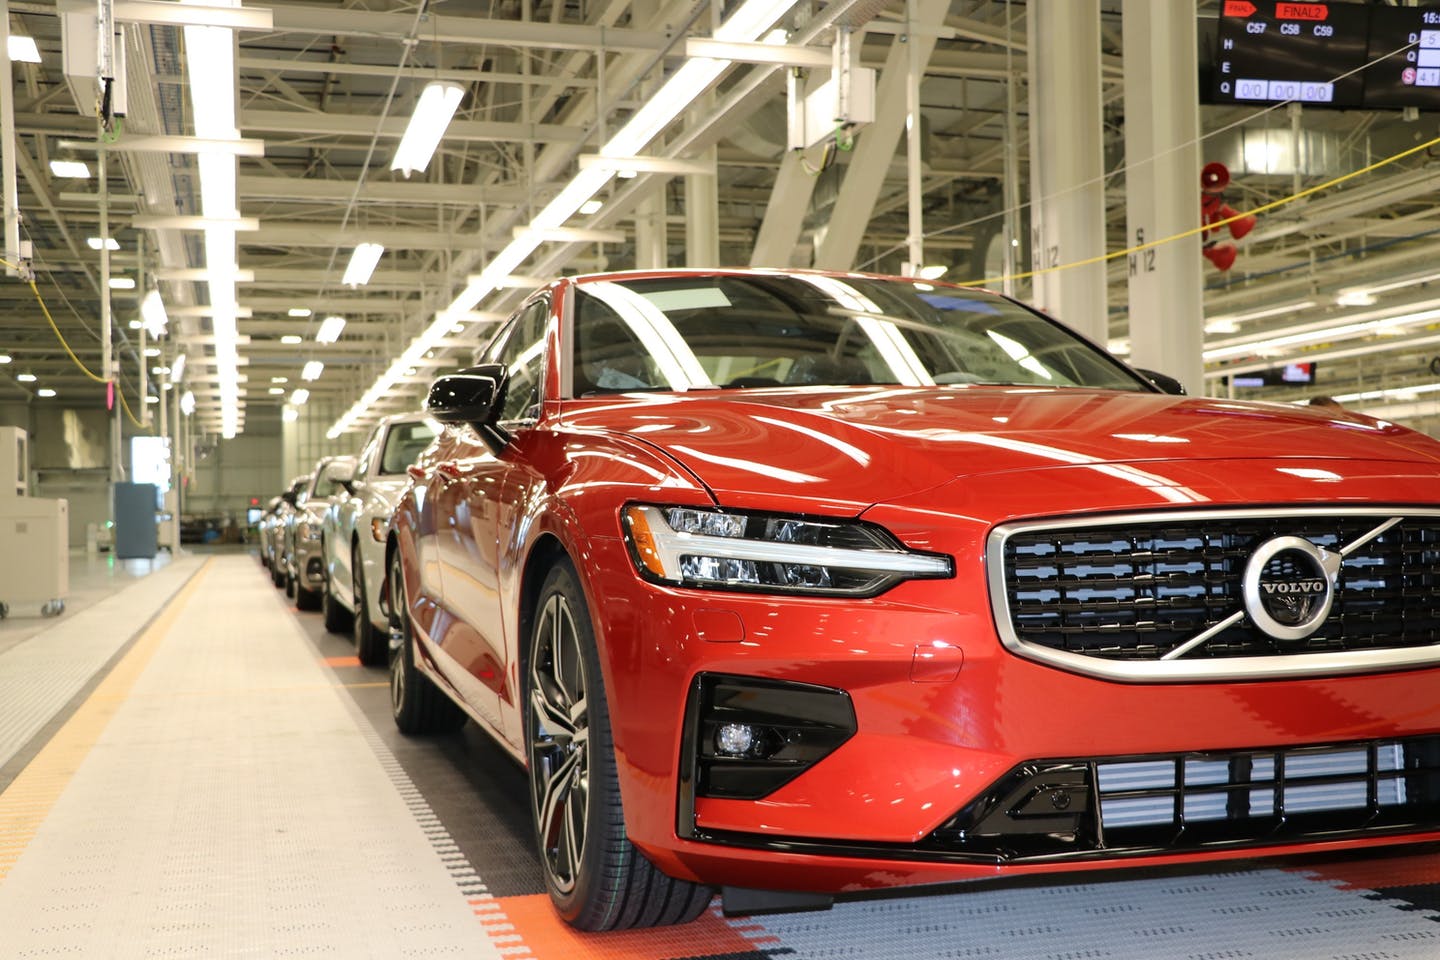 Volvo cars to lay off 1,300 white collar workers in Sweden